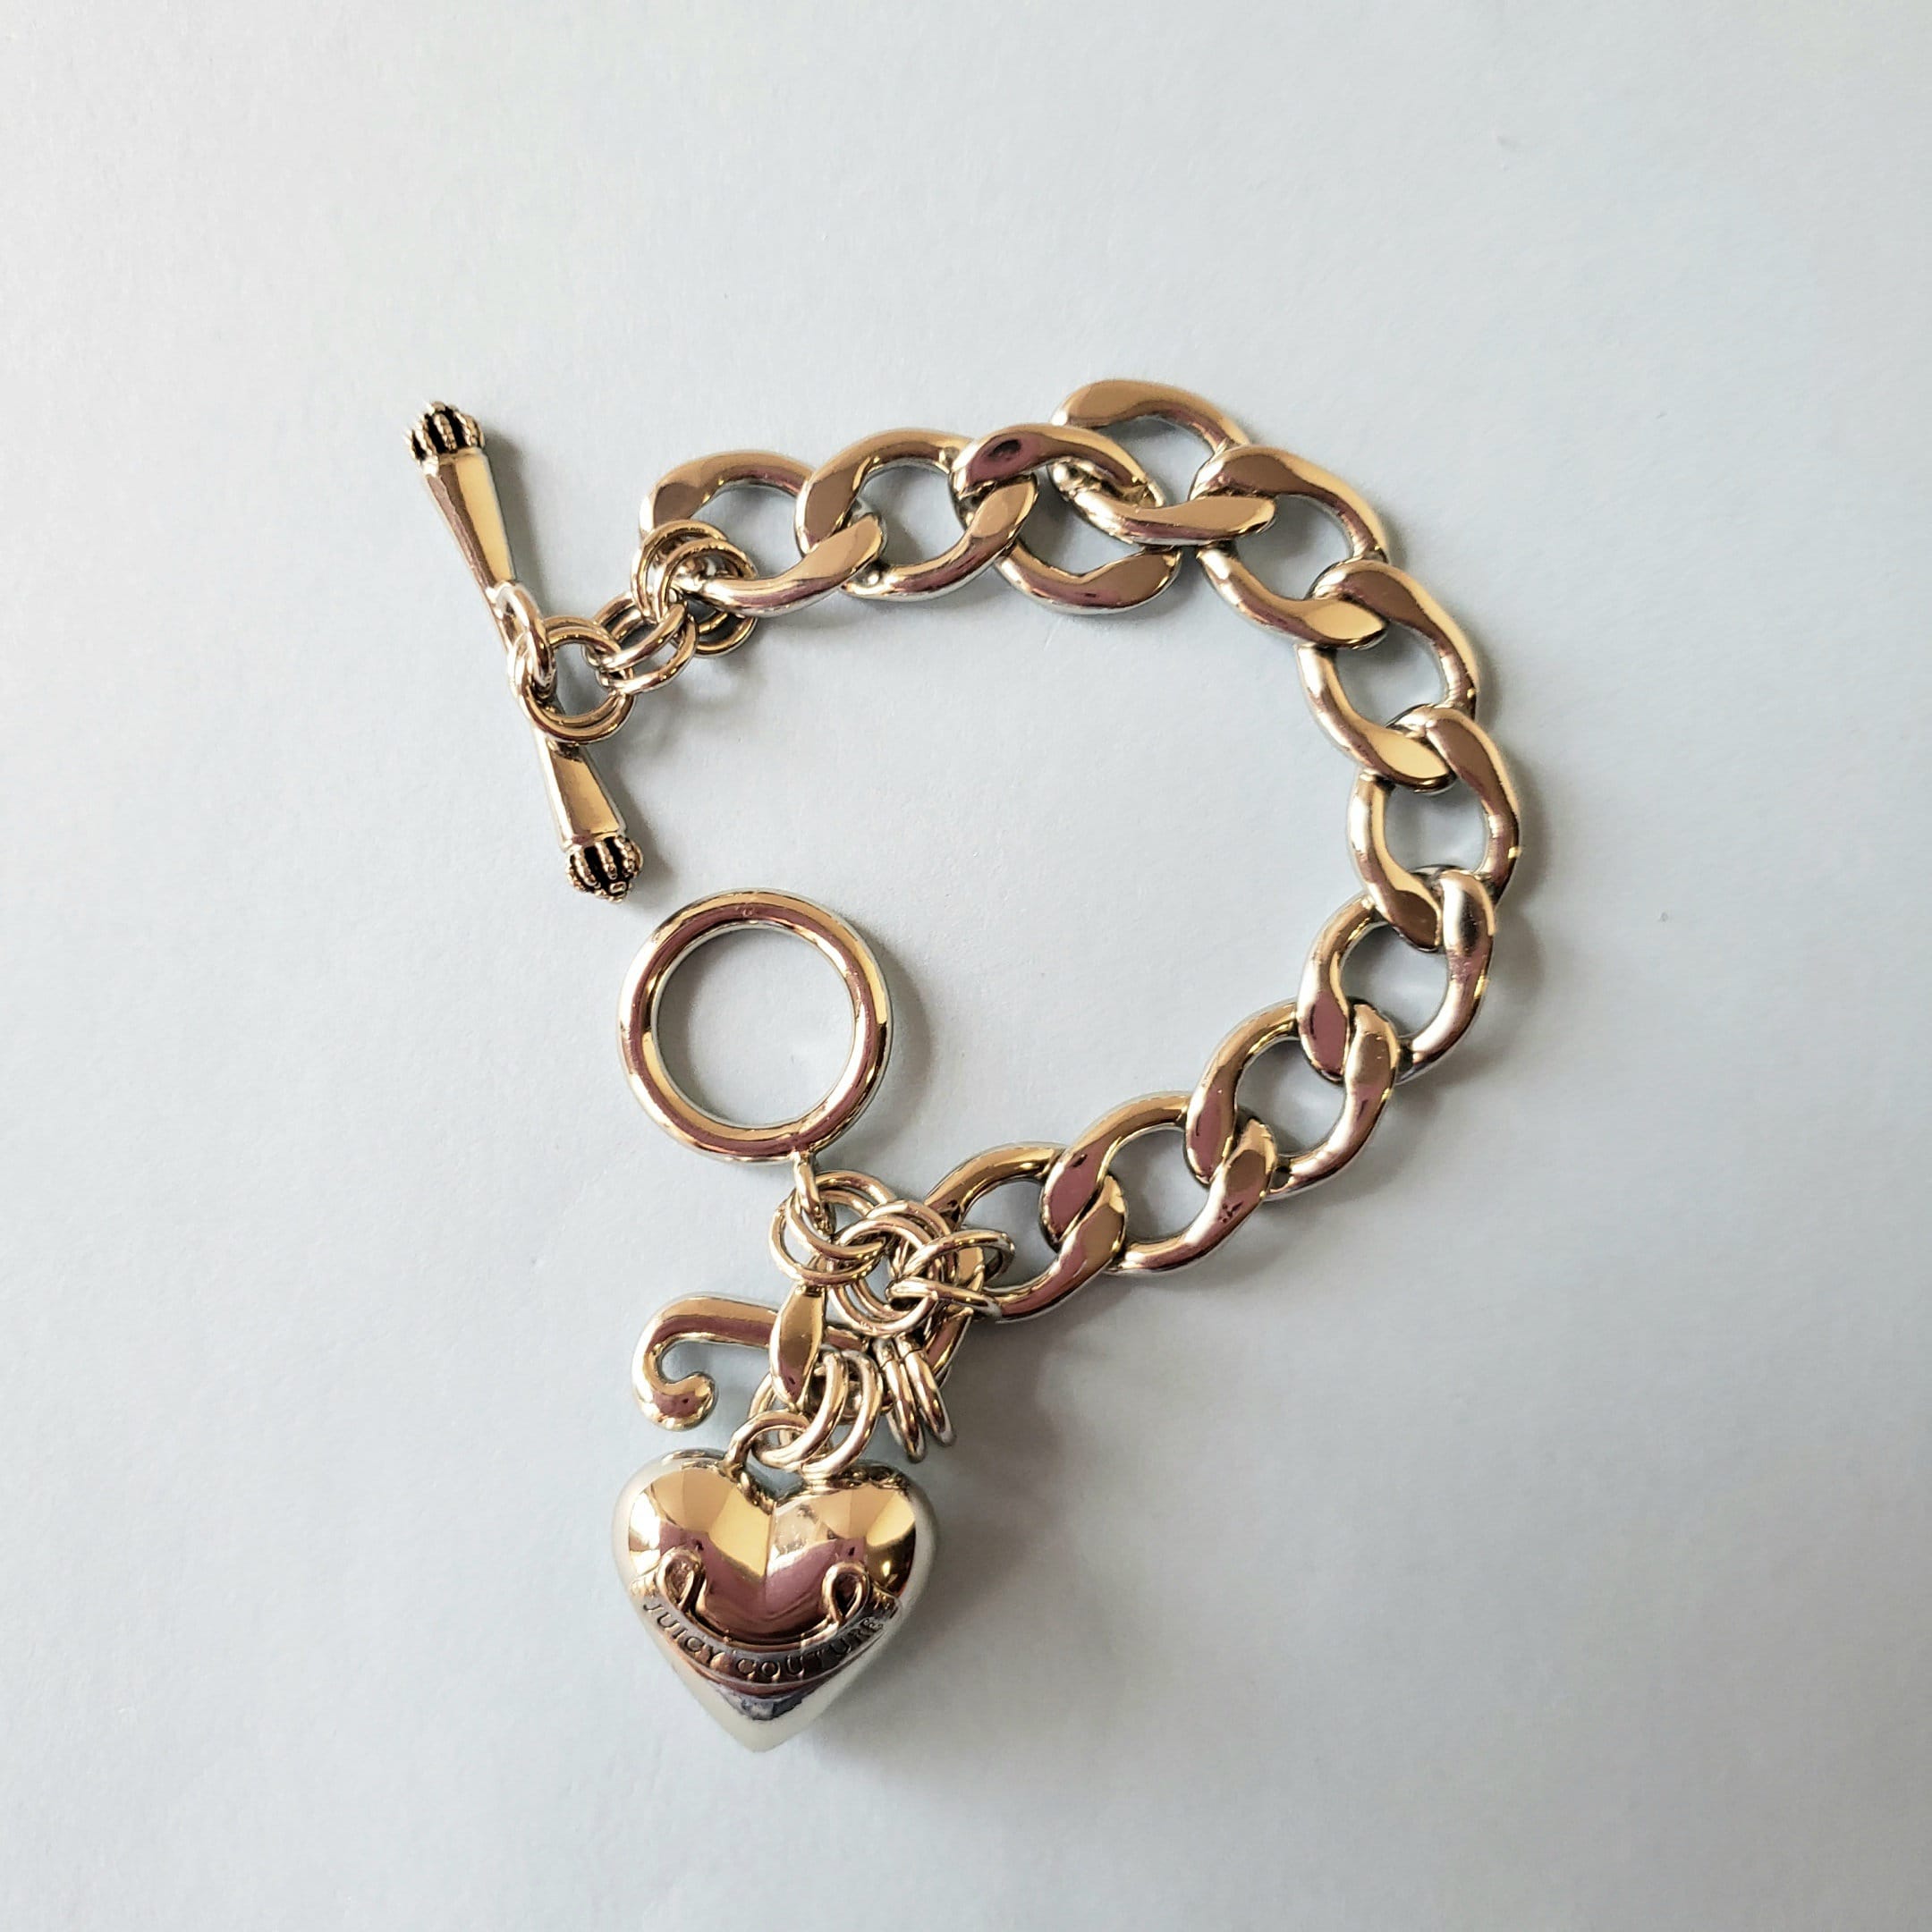 100% Authentic Juicy Couture Gold Heart And Black Bracelet